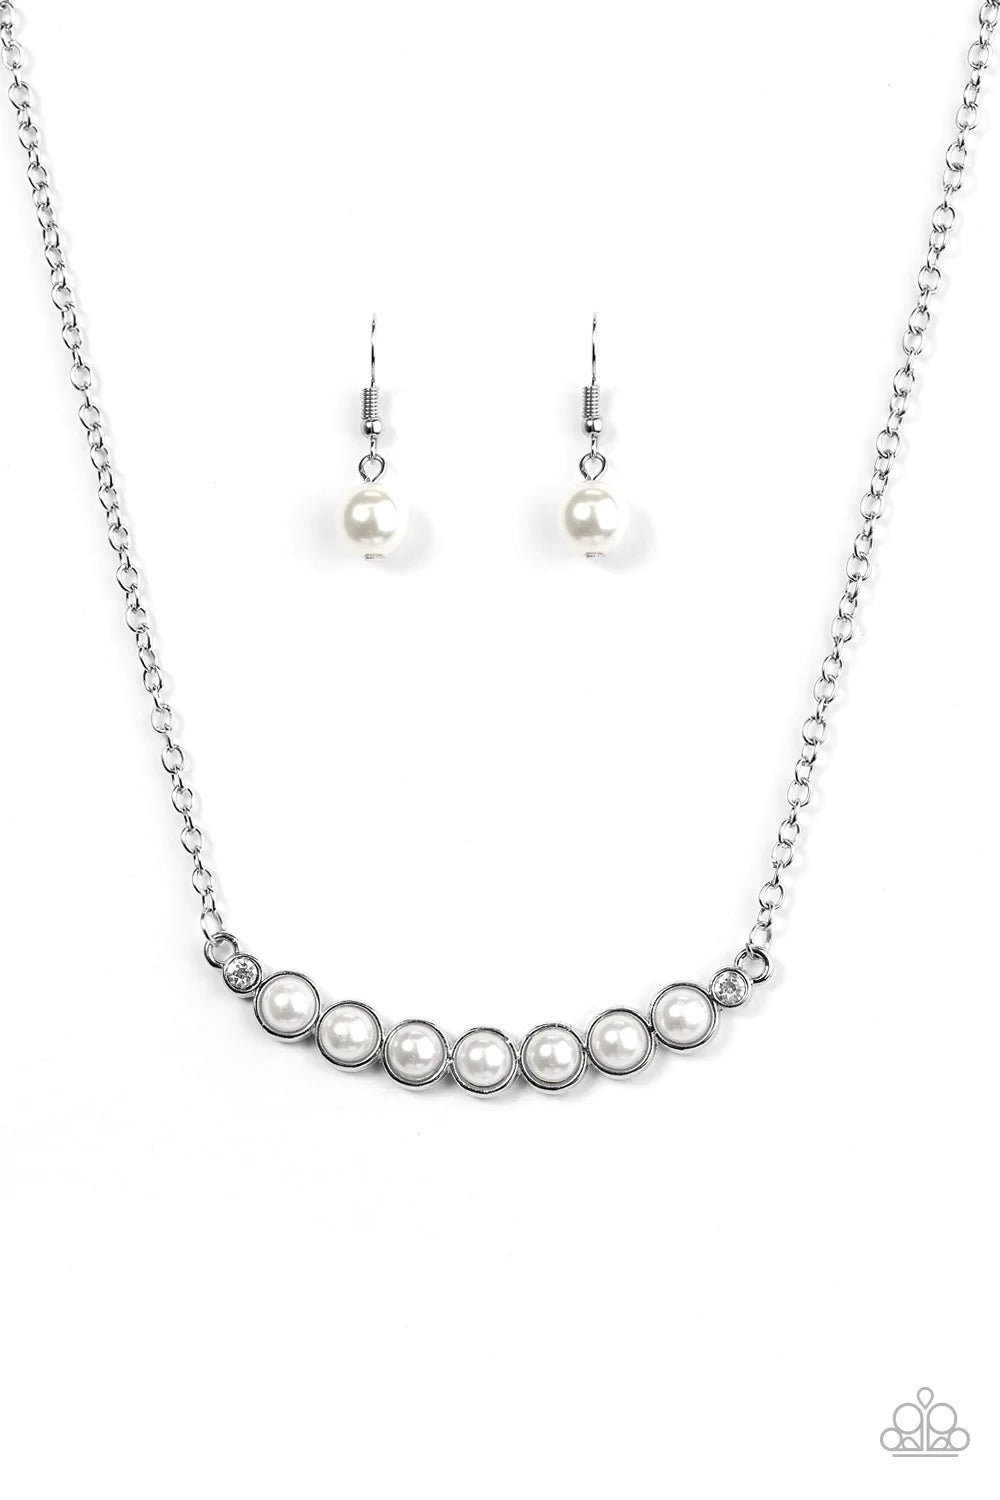 Paparazzi Necklace ~ The Ruling Class - White